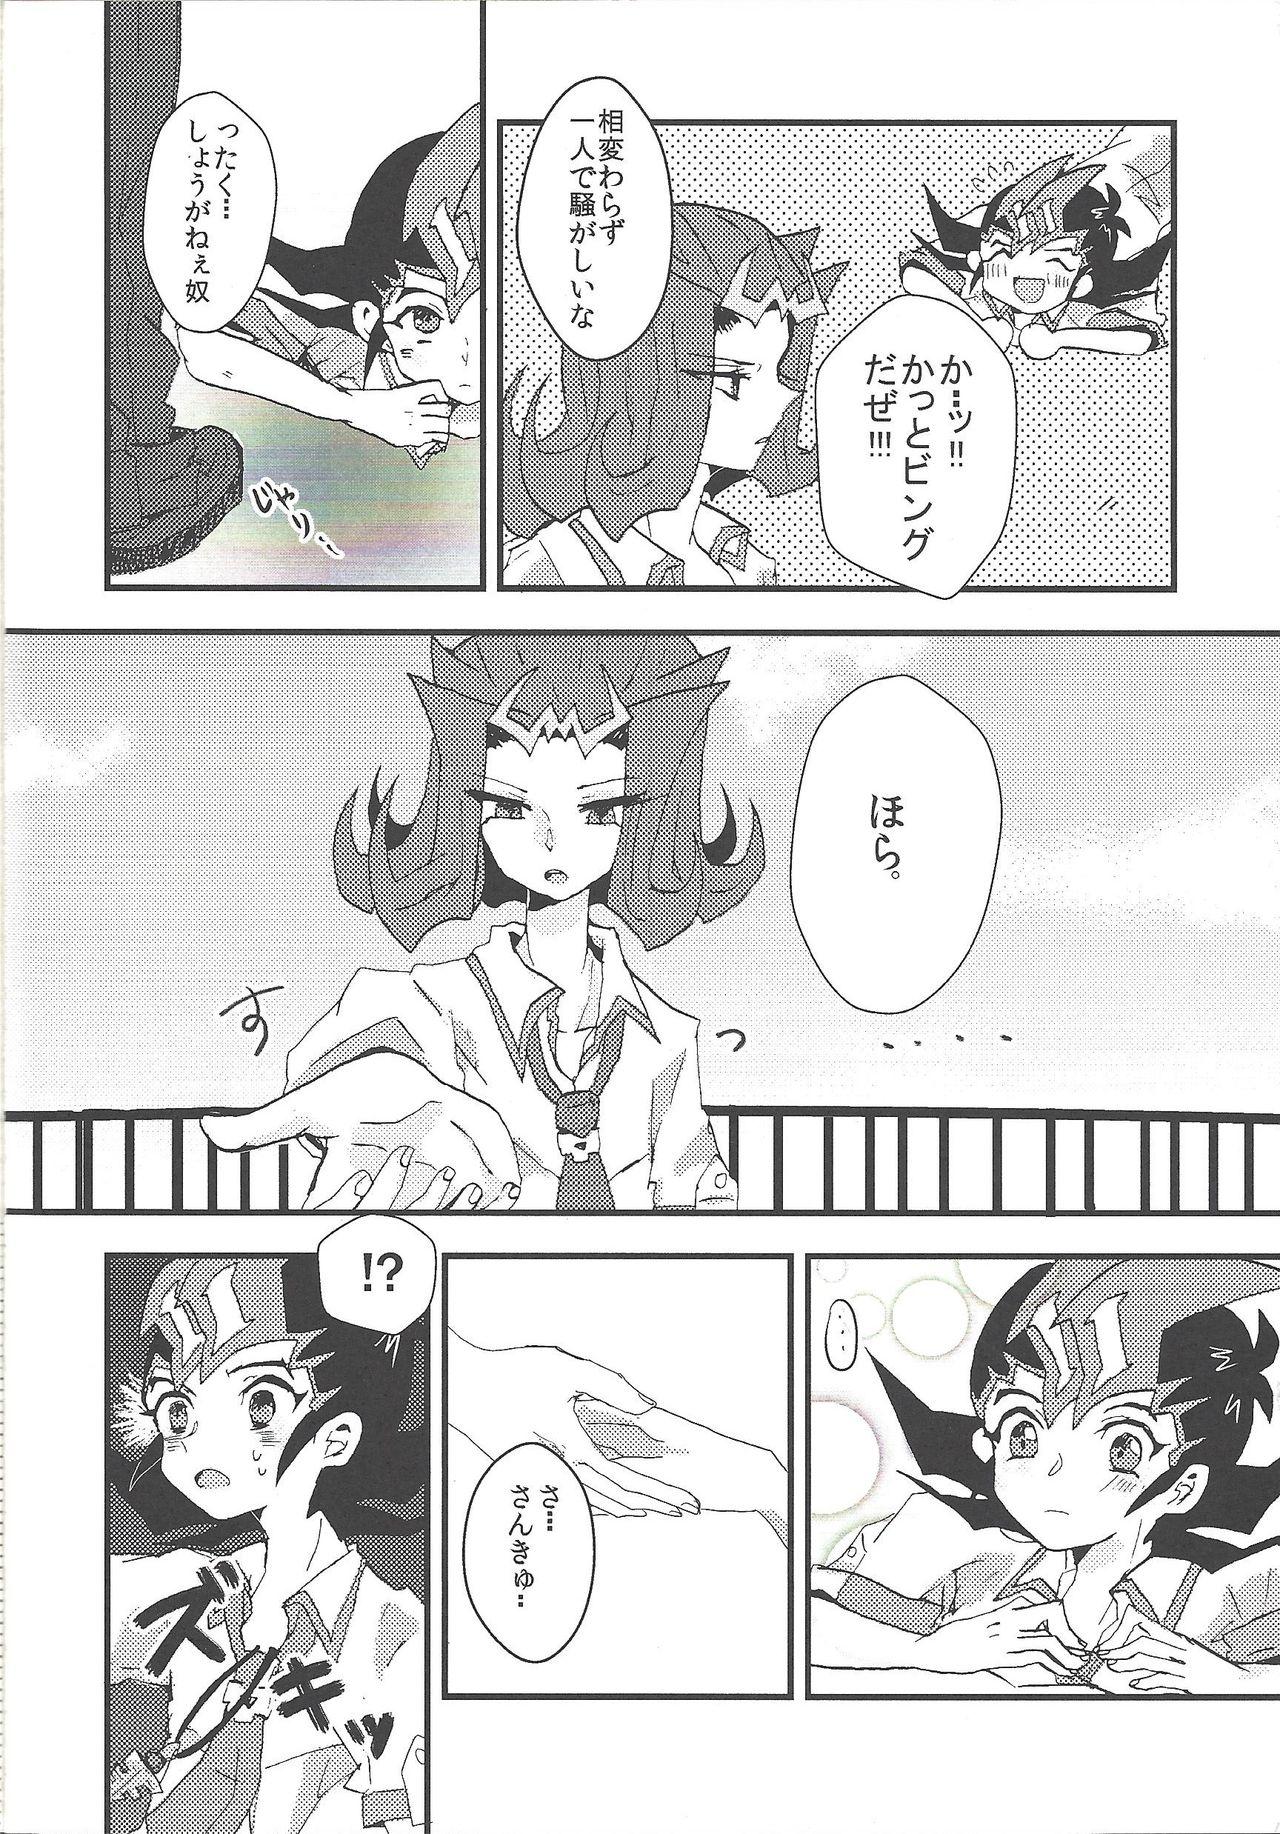 Off Jimmy Rig - Yu-gi-oh zexal Girl Sucking Dick - Page 5